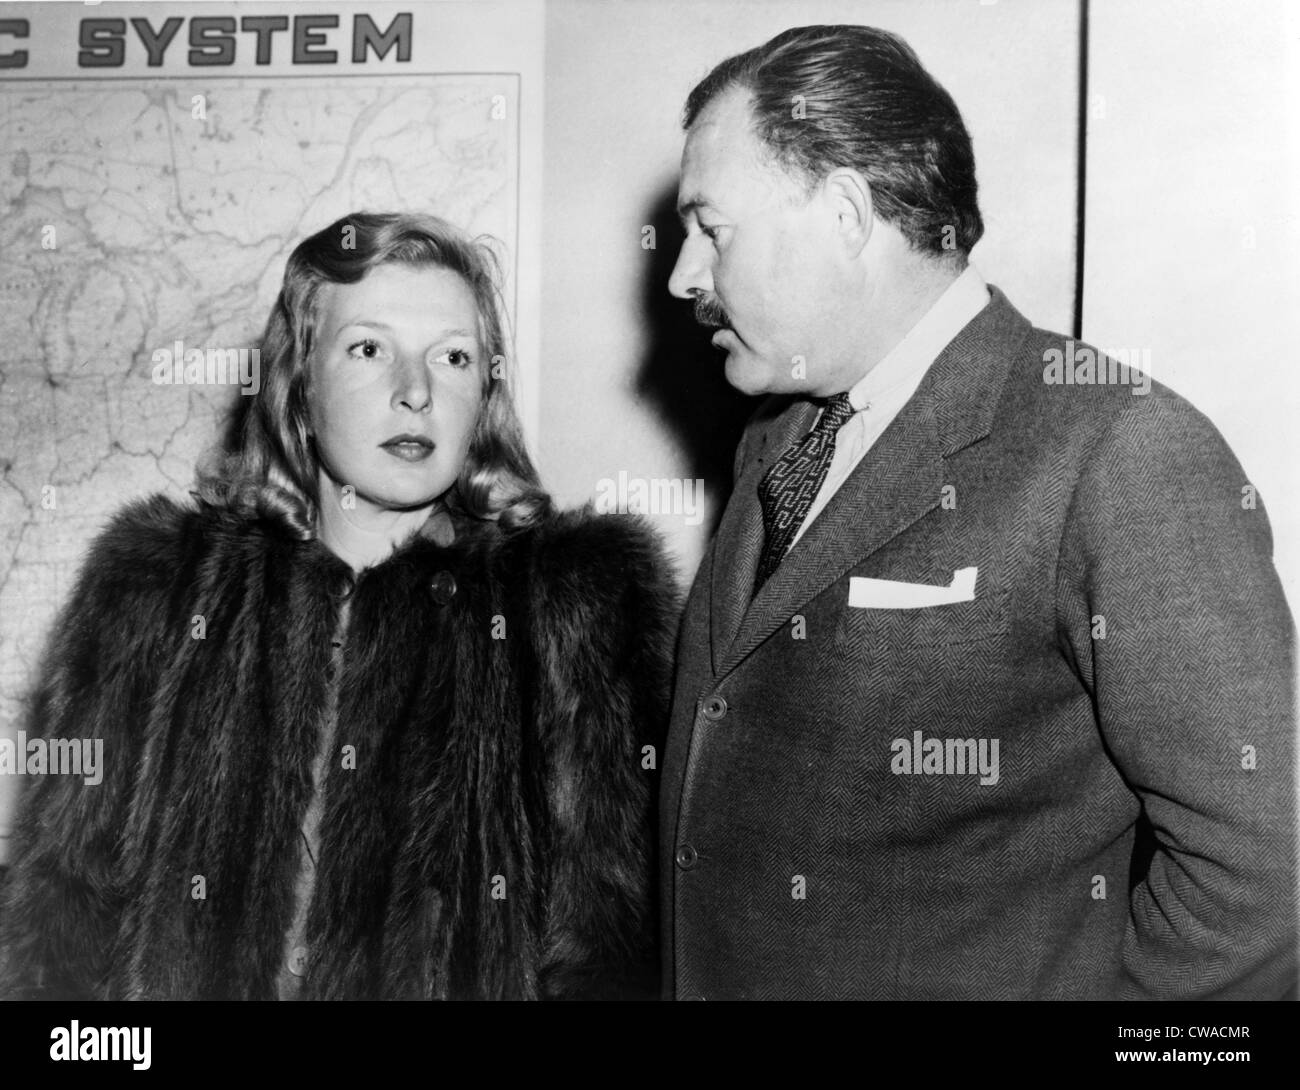 Ernest Hemingway (1899-1961) and journalist Martha Gellhorn, (1908-1998) traveling together shortly after their 1940 marriage. Stock Photo